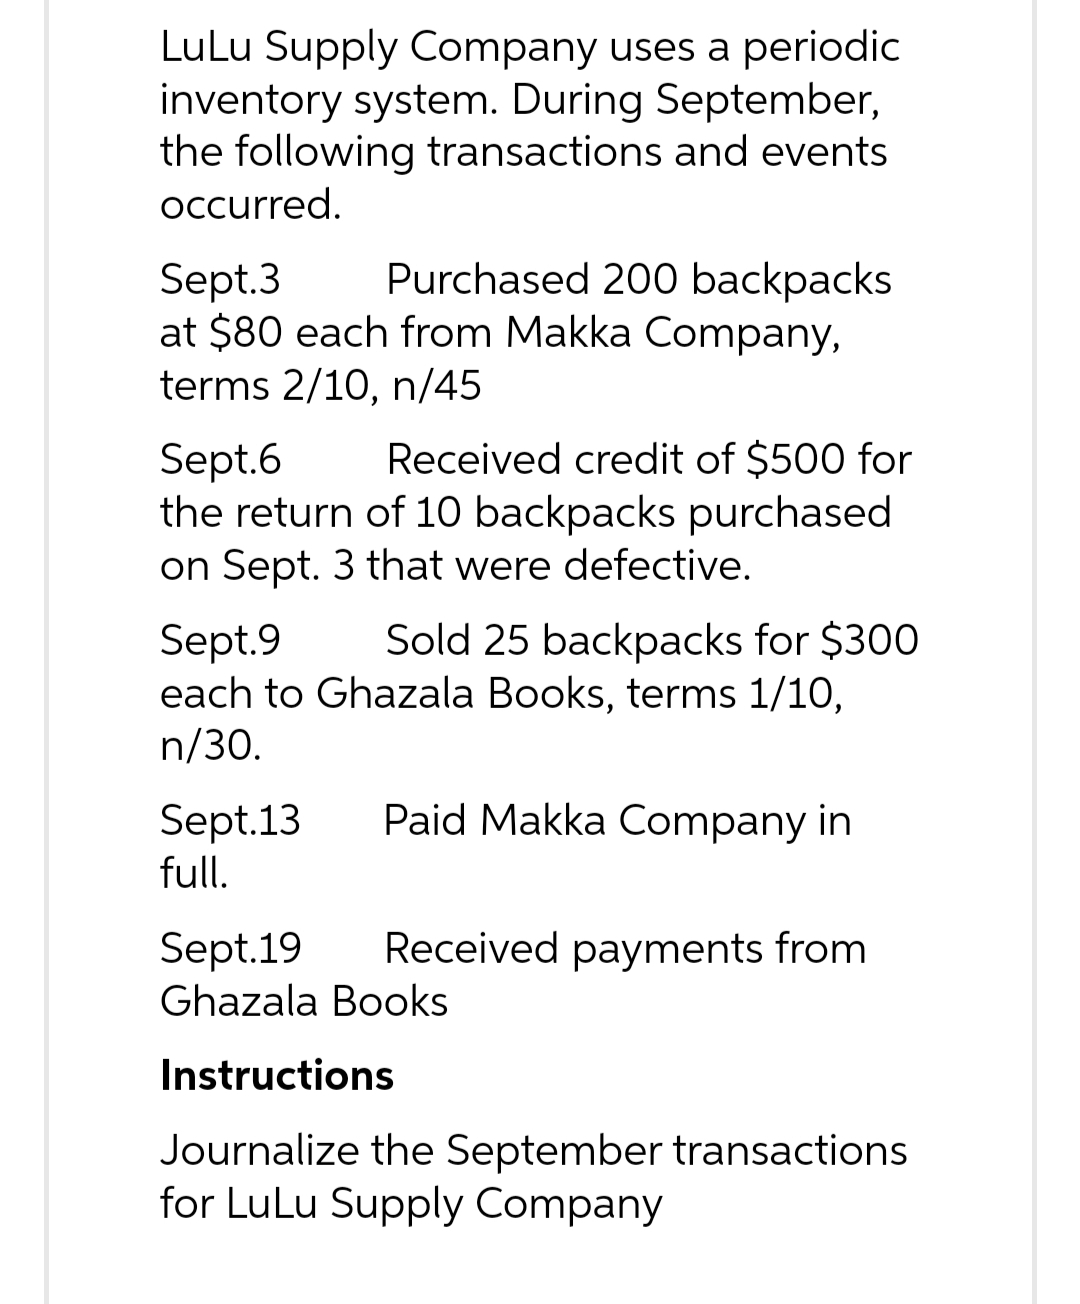 LuLu Supply Company uses a periodic
inventory system. During September,
the following transactions and events
occurred.
Sept.3
Purchased 200 backpacks
at $80 each from Makka Company,
terms 2/10, n/45
Sept.6
Received credit of $500 for
the return of 10 backpacks purchased
on Sept. 3 that were defective.
Sept.9
Sold 25 backpacks for $300
each to Ghazala Books, terms 1/10,
n/30.
Sept.13
full.
Paid Makka Company in
Sept.19 Received payments from
Ghazala Books
Instructions
Journalize the September transactions
for LuLu Supply Company